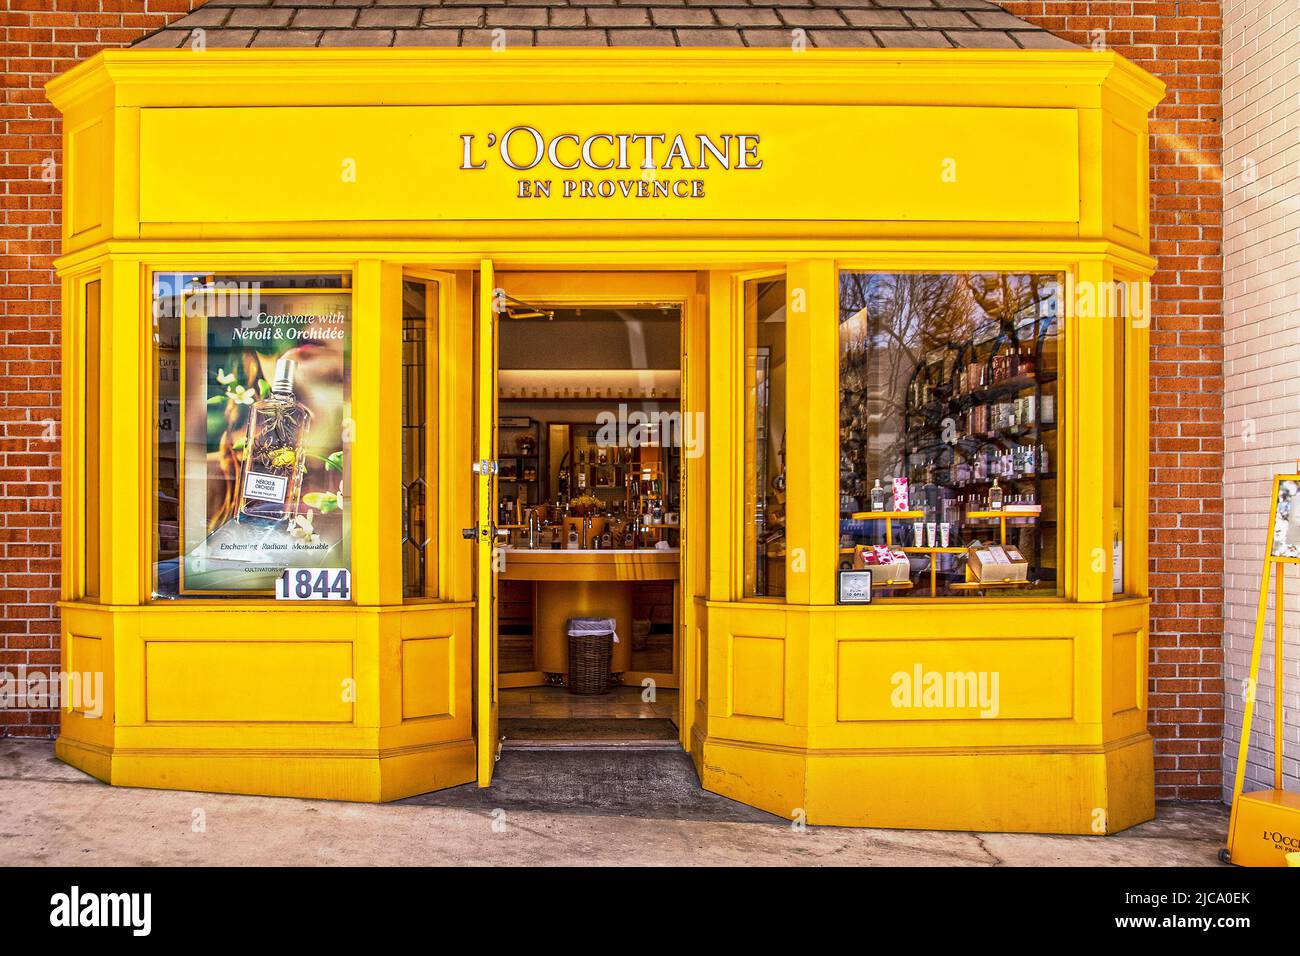 2022-04-06 Tulsa USA L Occitane en Provence perfume and body care store - Yellow wooden bay window storefront in Utica Square shopping Center - door s Stock Photo